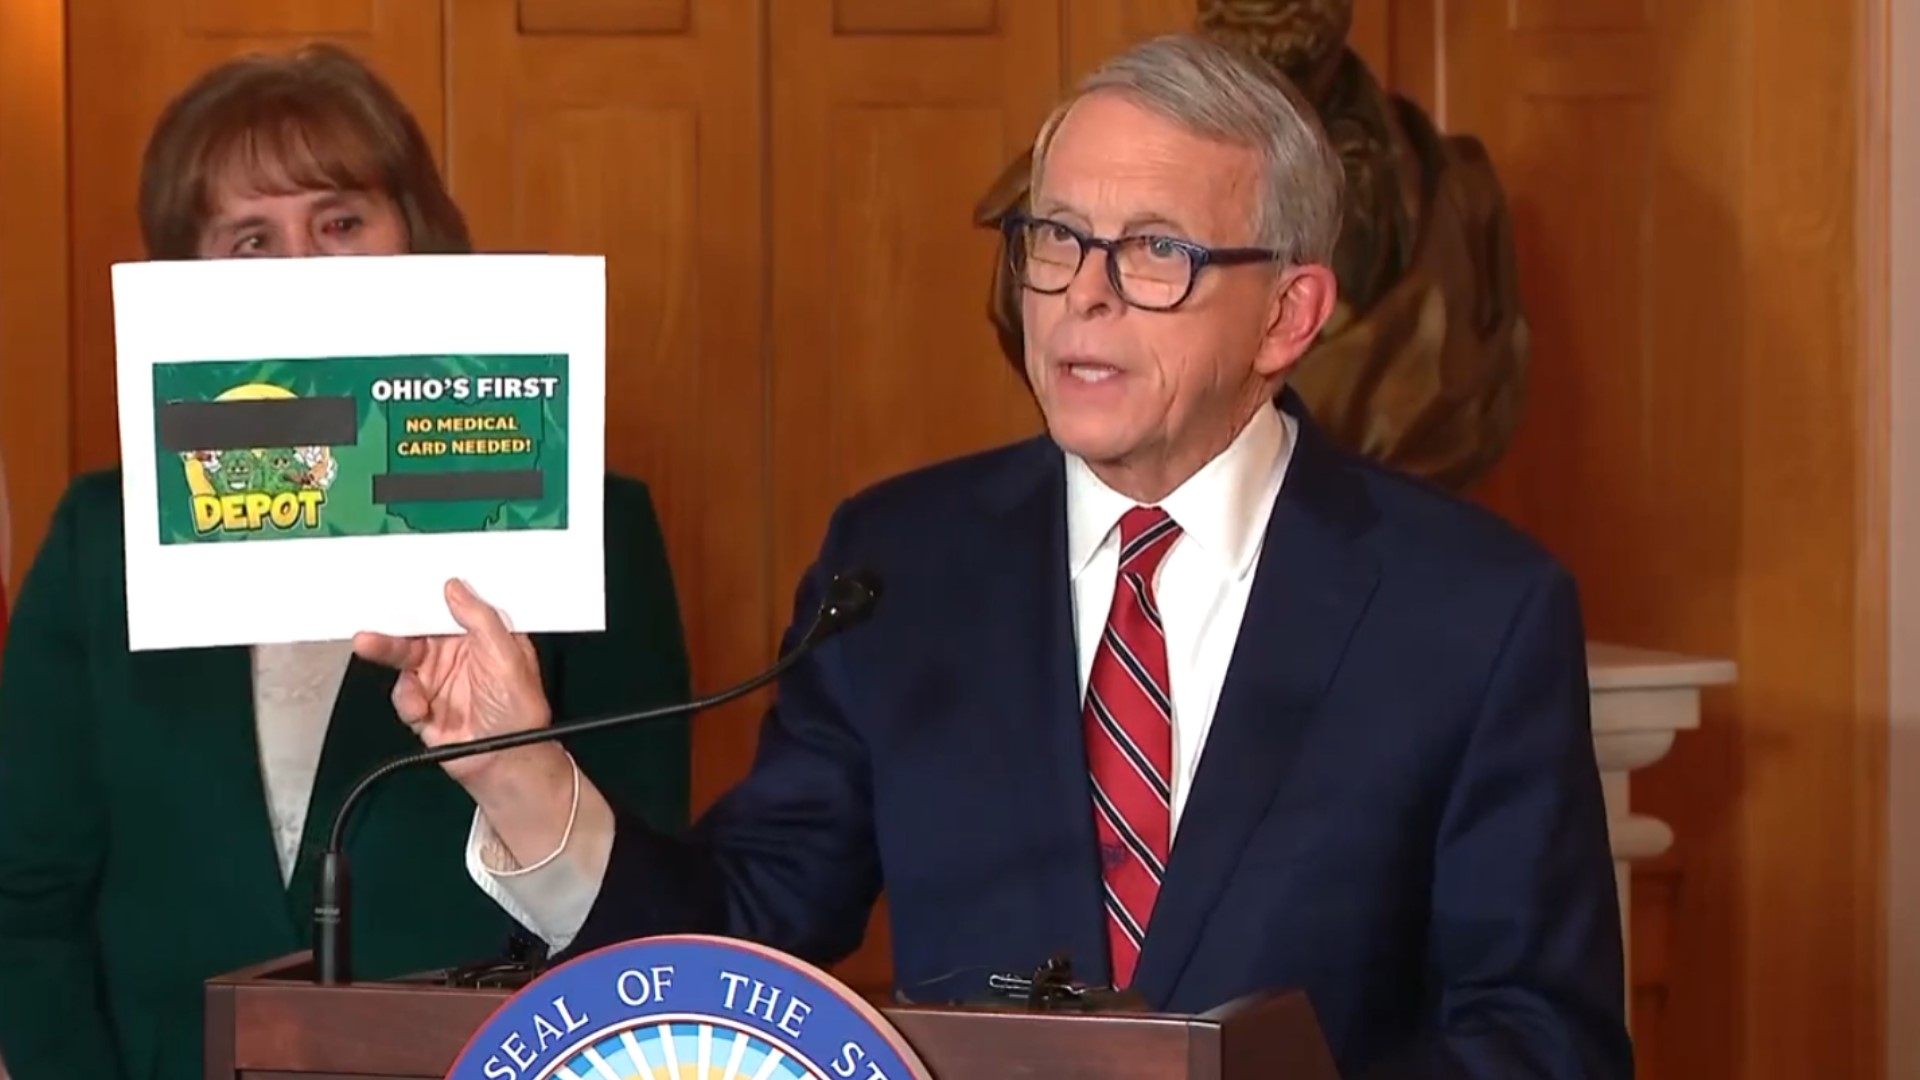 DeWine's remarks come as a bill to modify Issue 2 is working its way through the Ohio General Assembly.